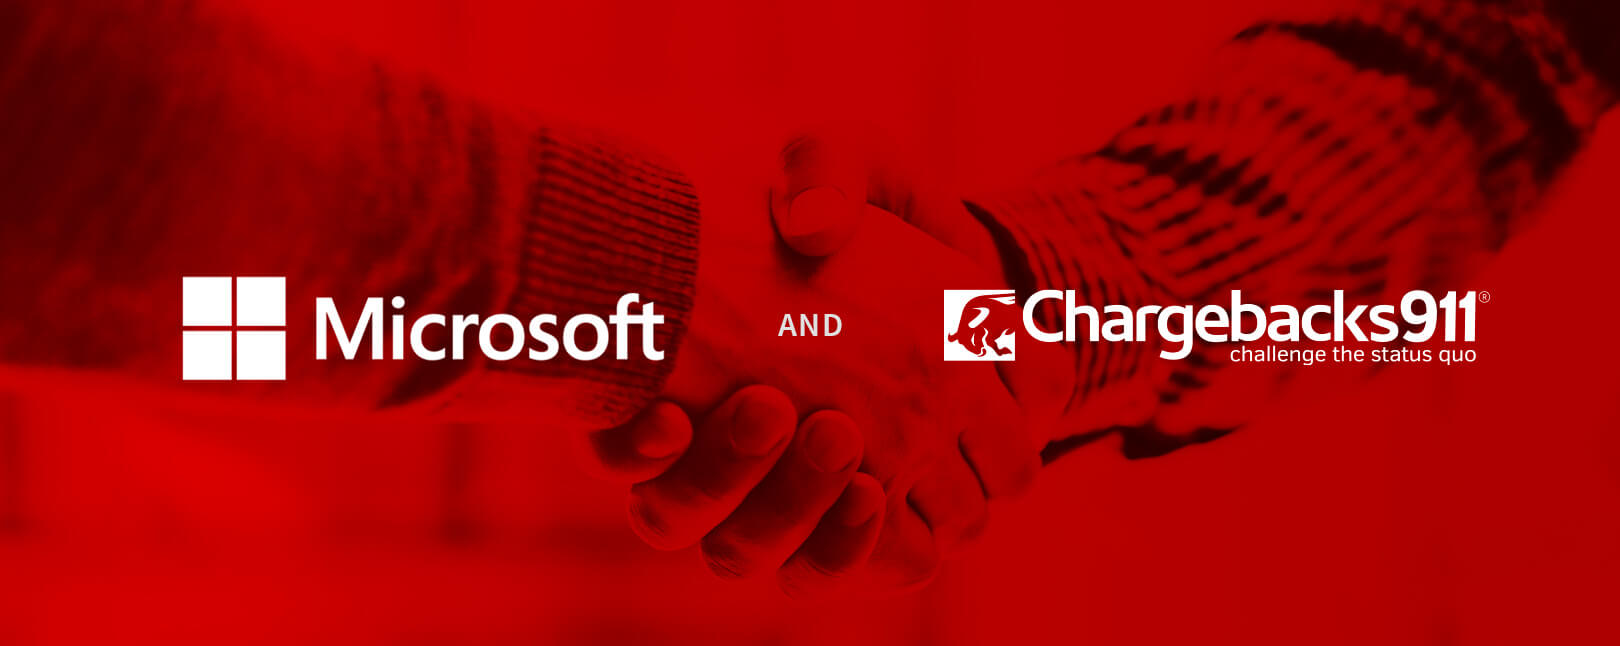 Chargebacks911® & Microsoft Team Up to Launch Fraud Protection Solution for FIs